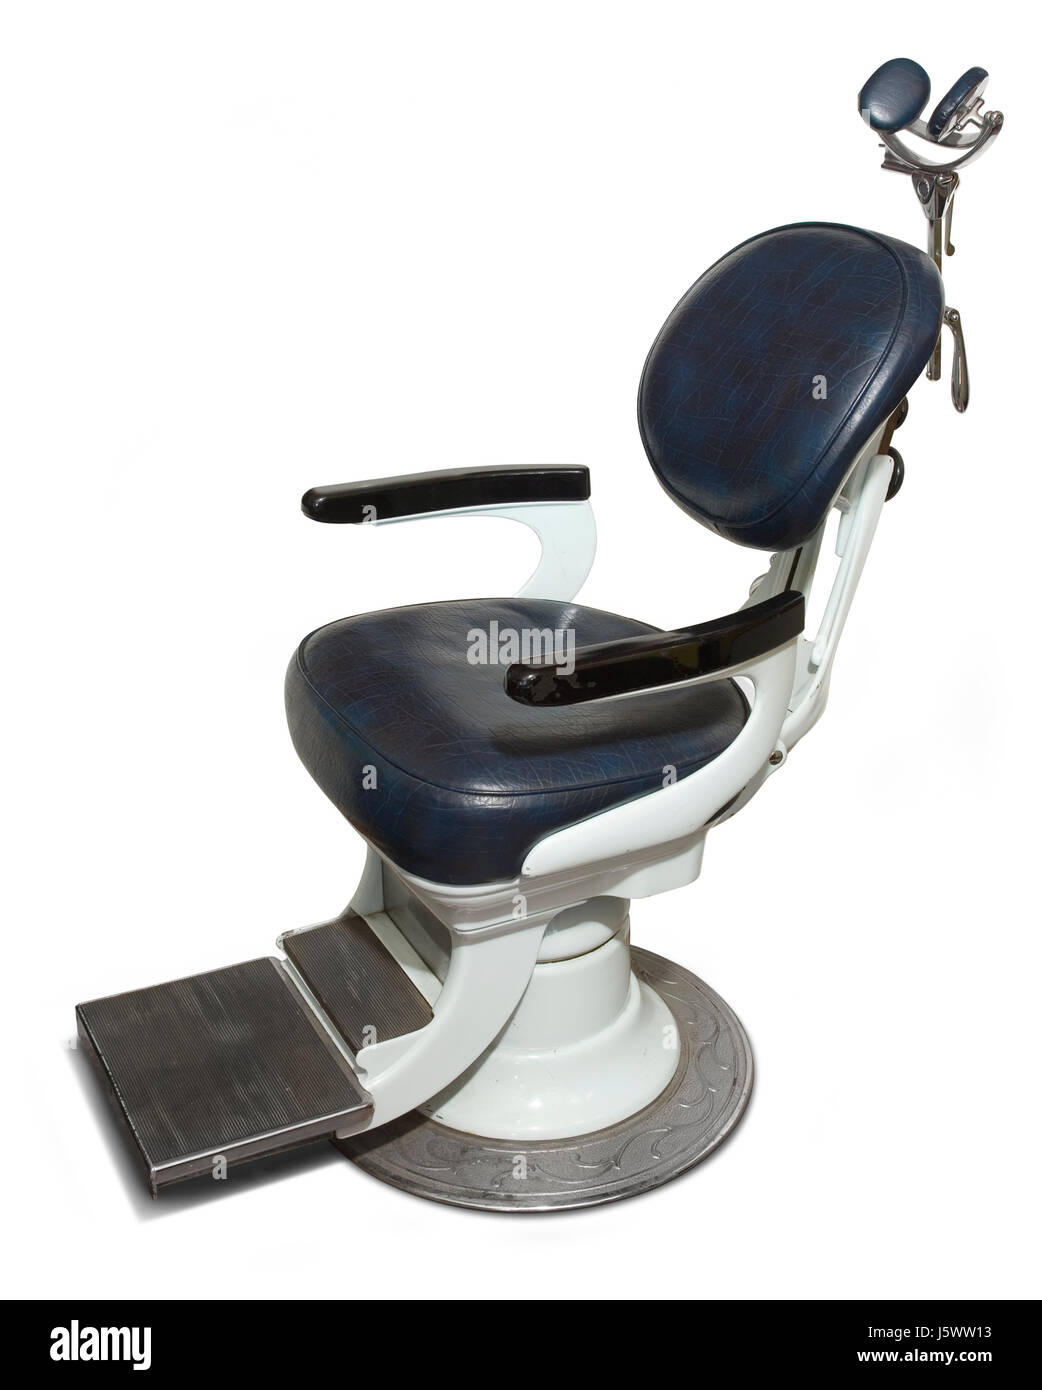 antique hygiene retro chair dental jagged path isolated antique vintage retro Stock Photo